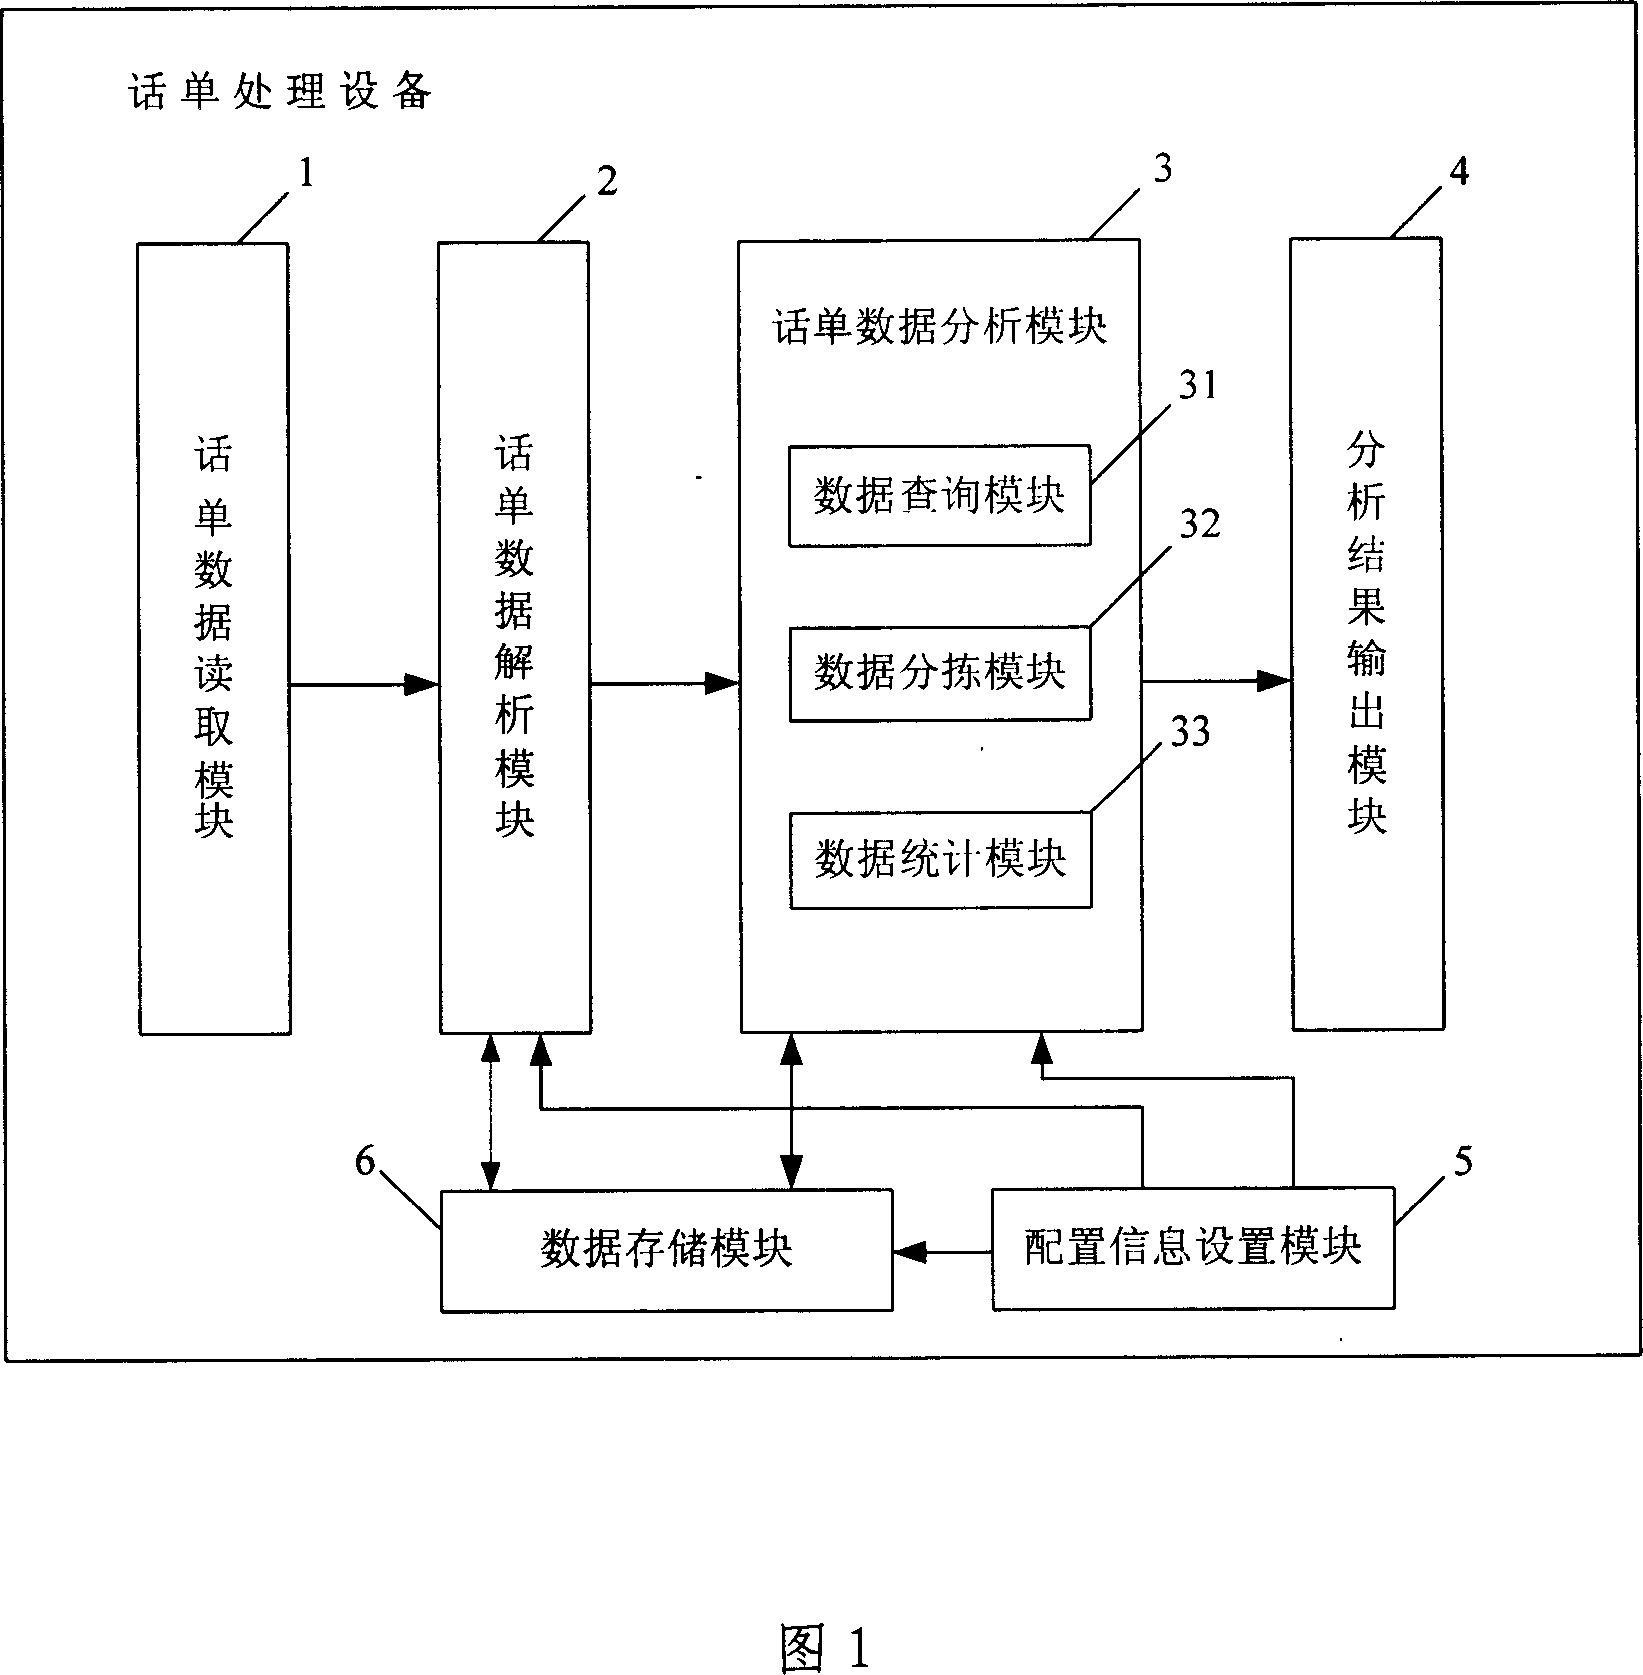 Tollticket processing equipment and method